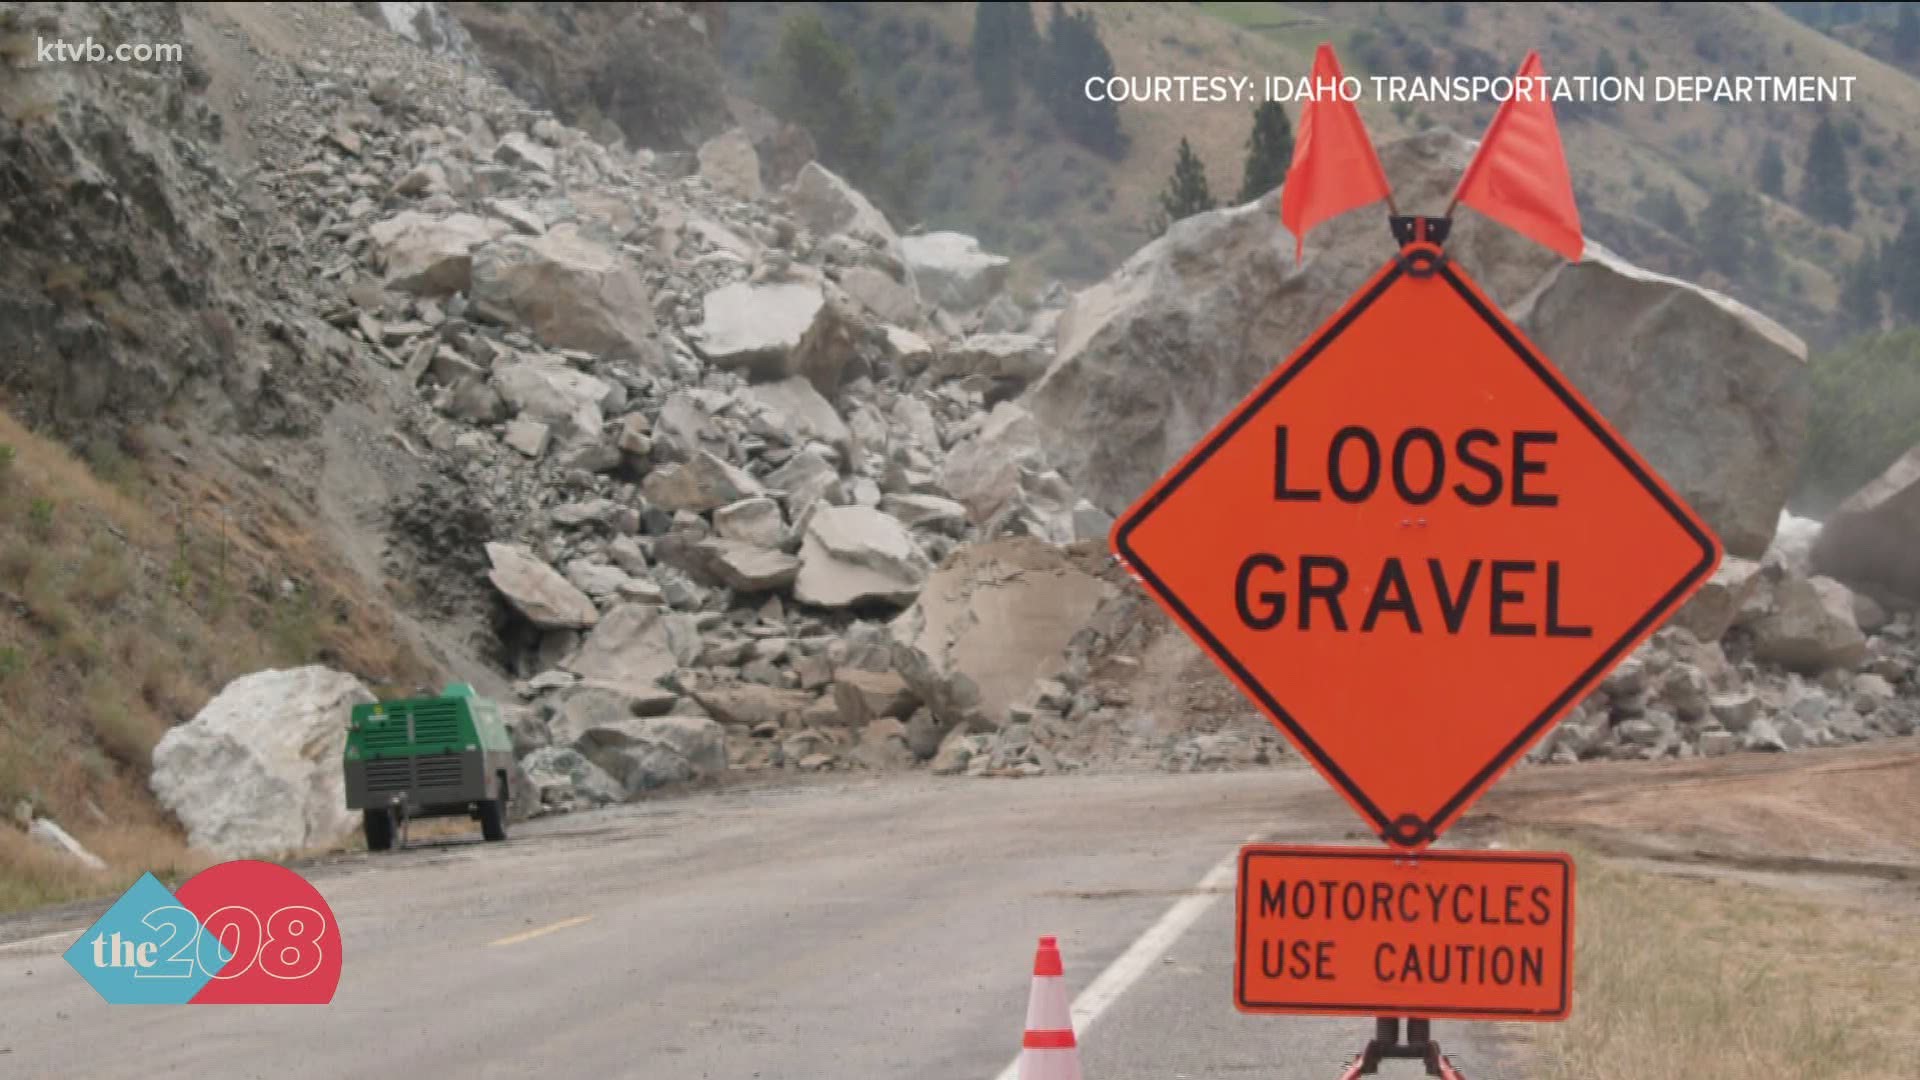 The Idaho Transportation Department sign next to a giant rock slide might be considered a little bit amusing.